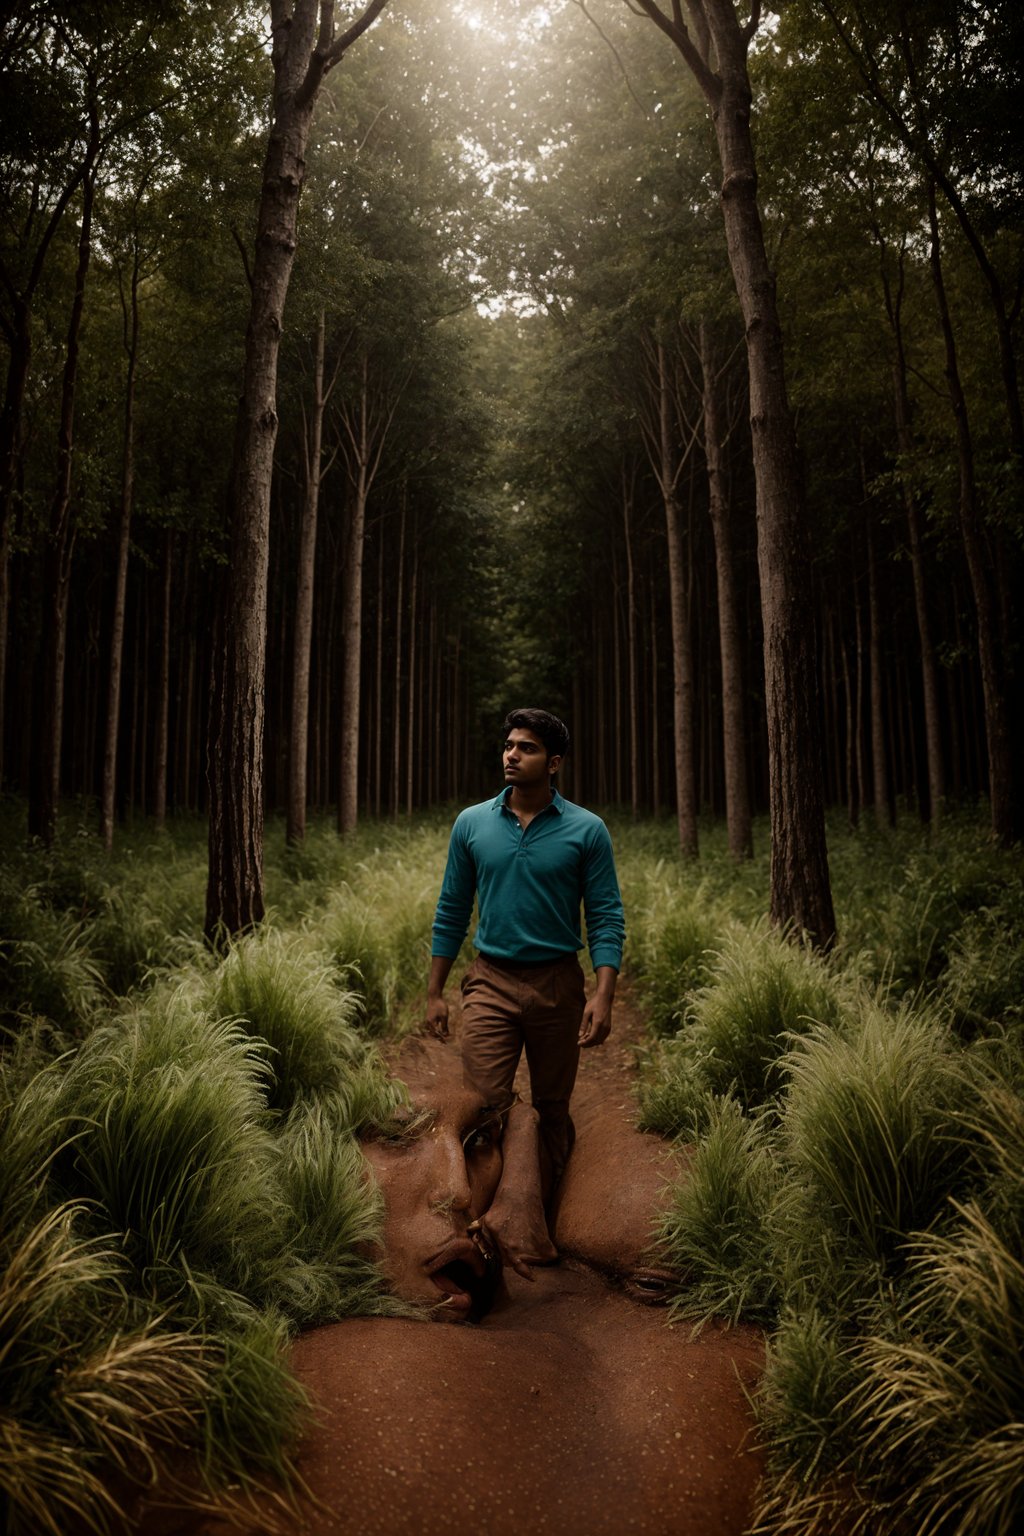 man outside in nature in forest or jungle or a field of wheat enjoying the natural world